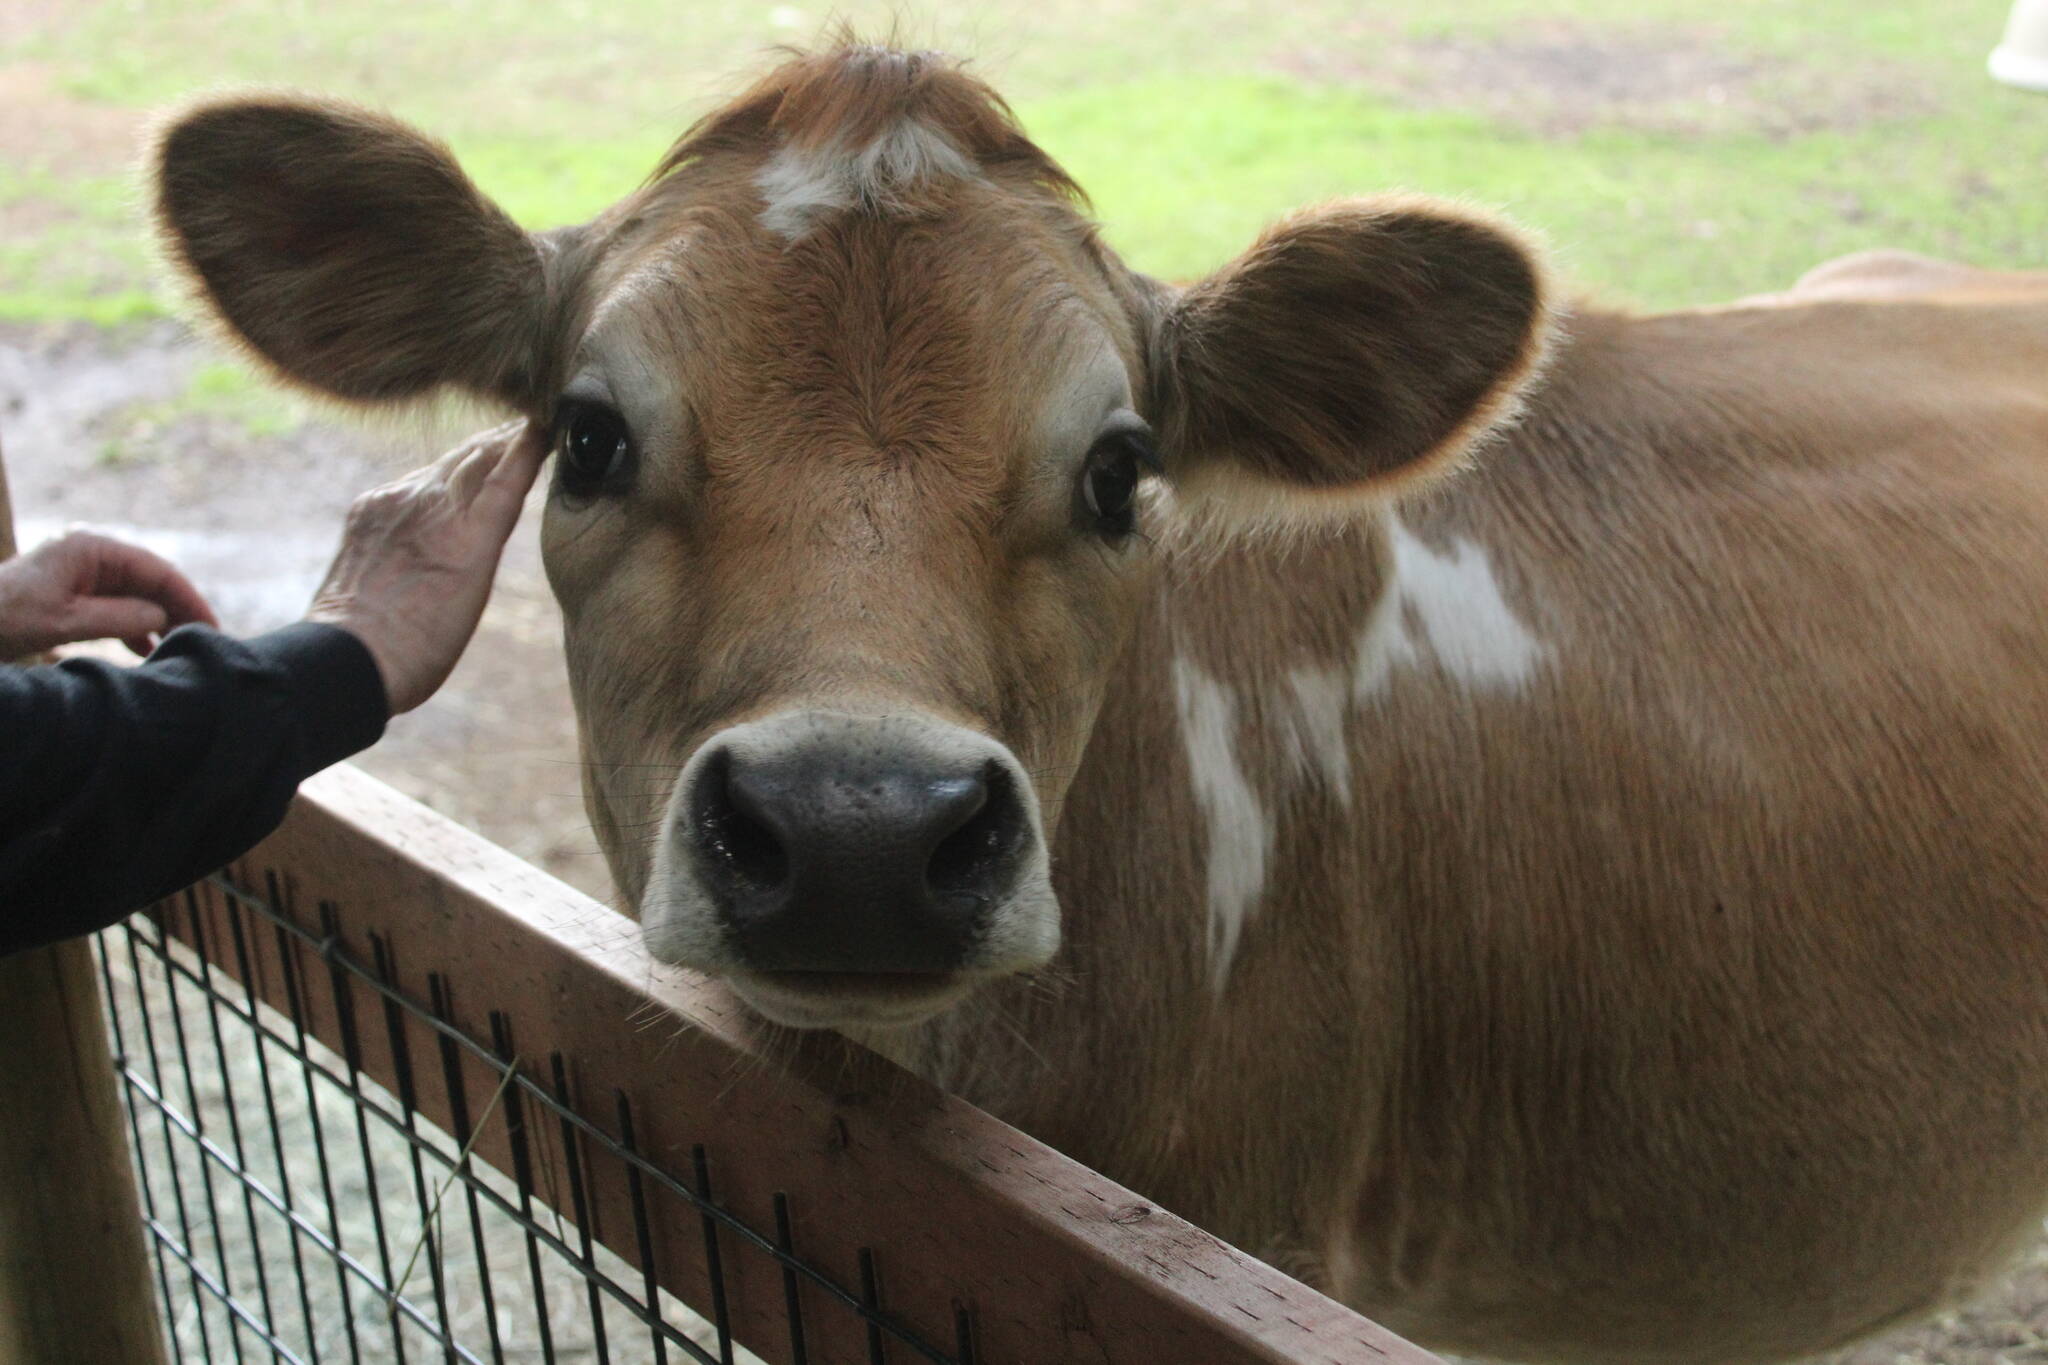 Moo is the lone bovine at Serenity Equine.